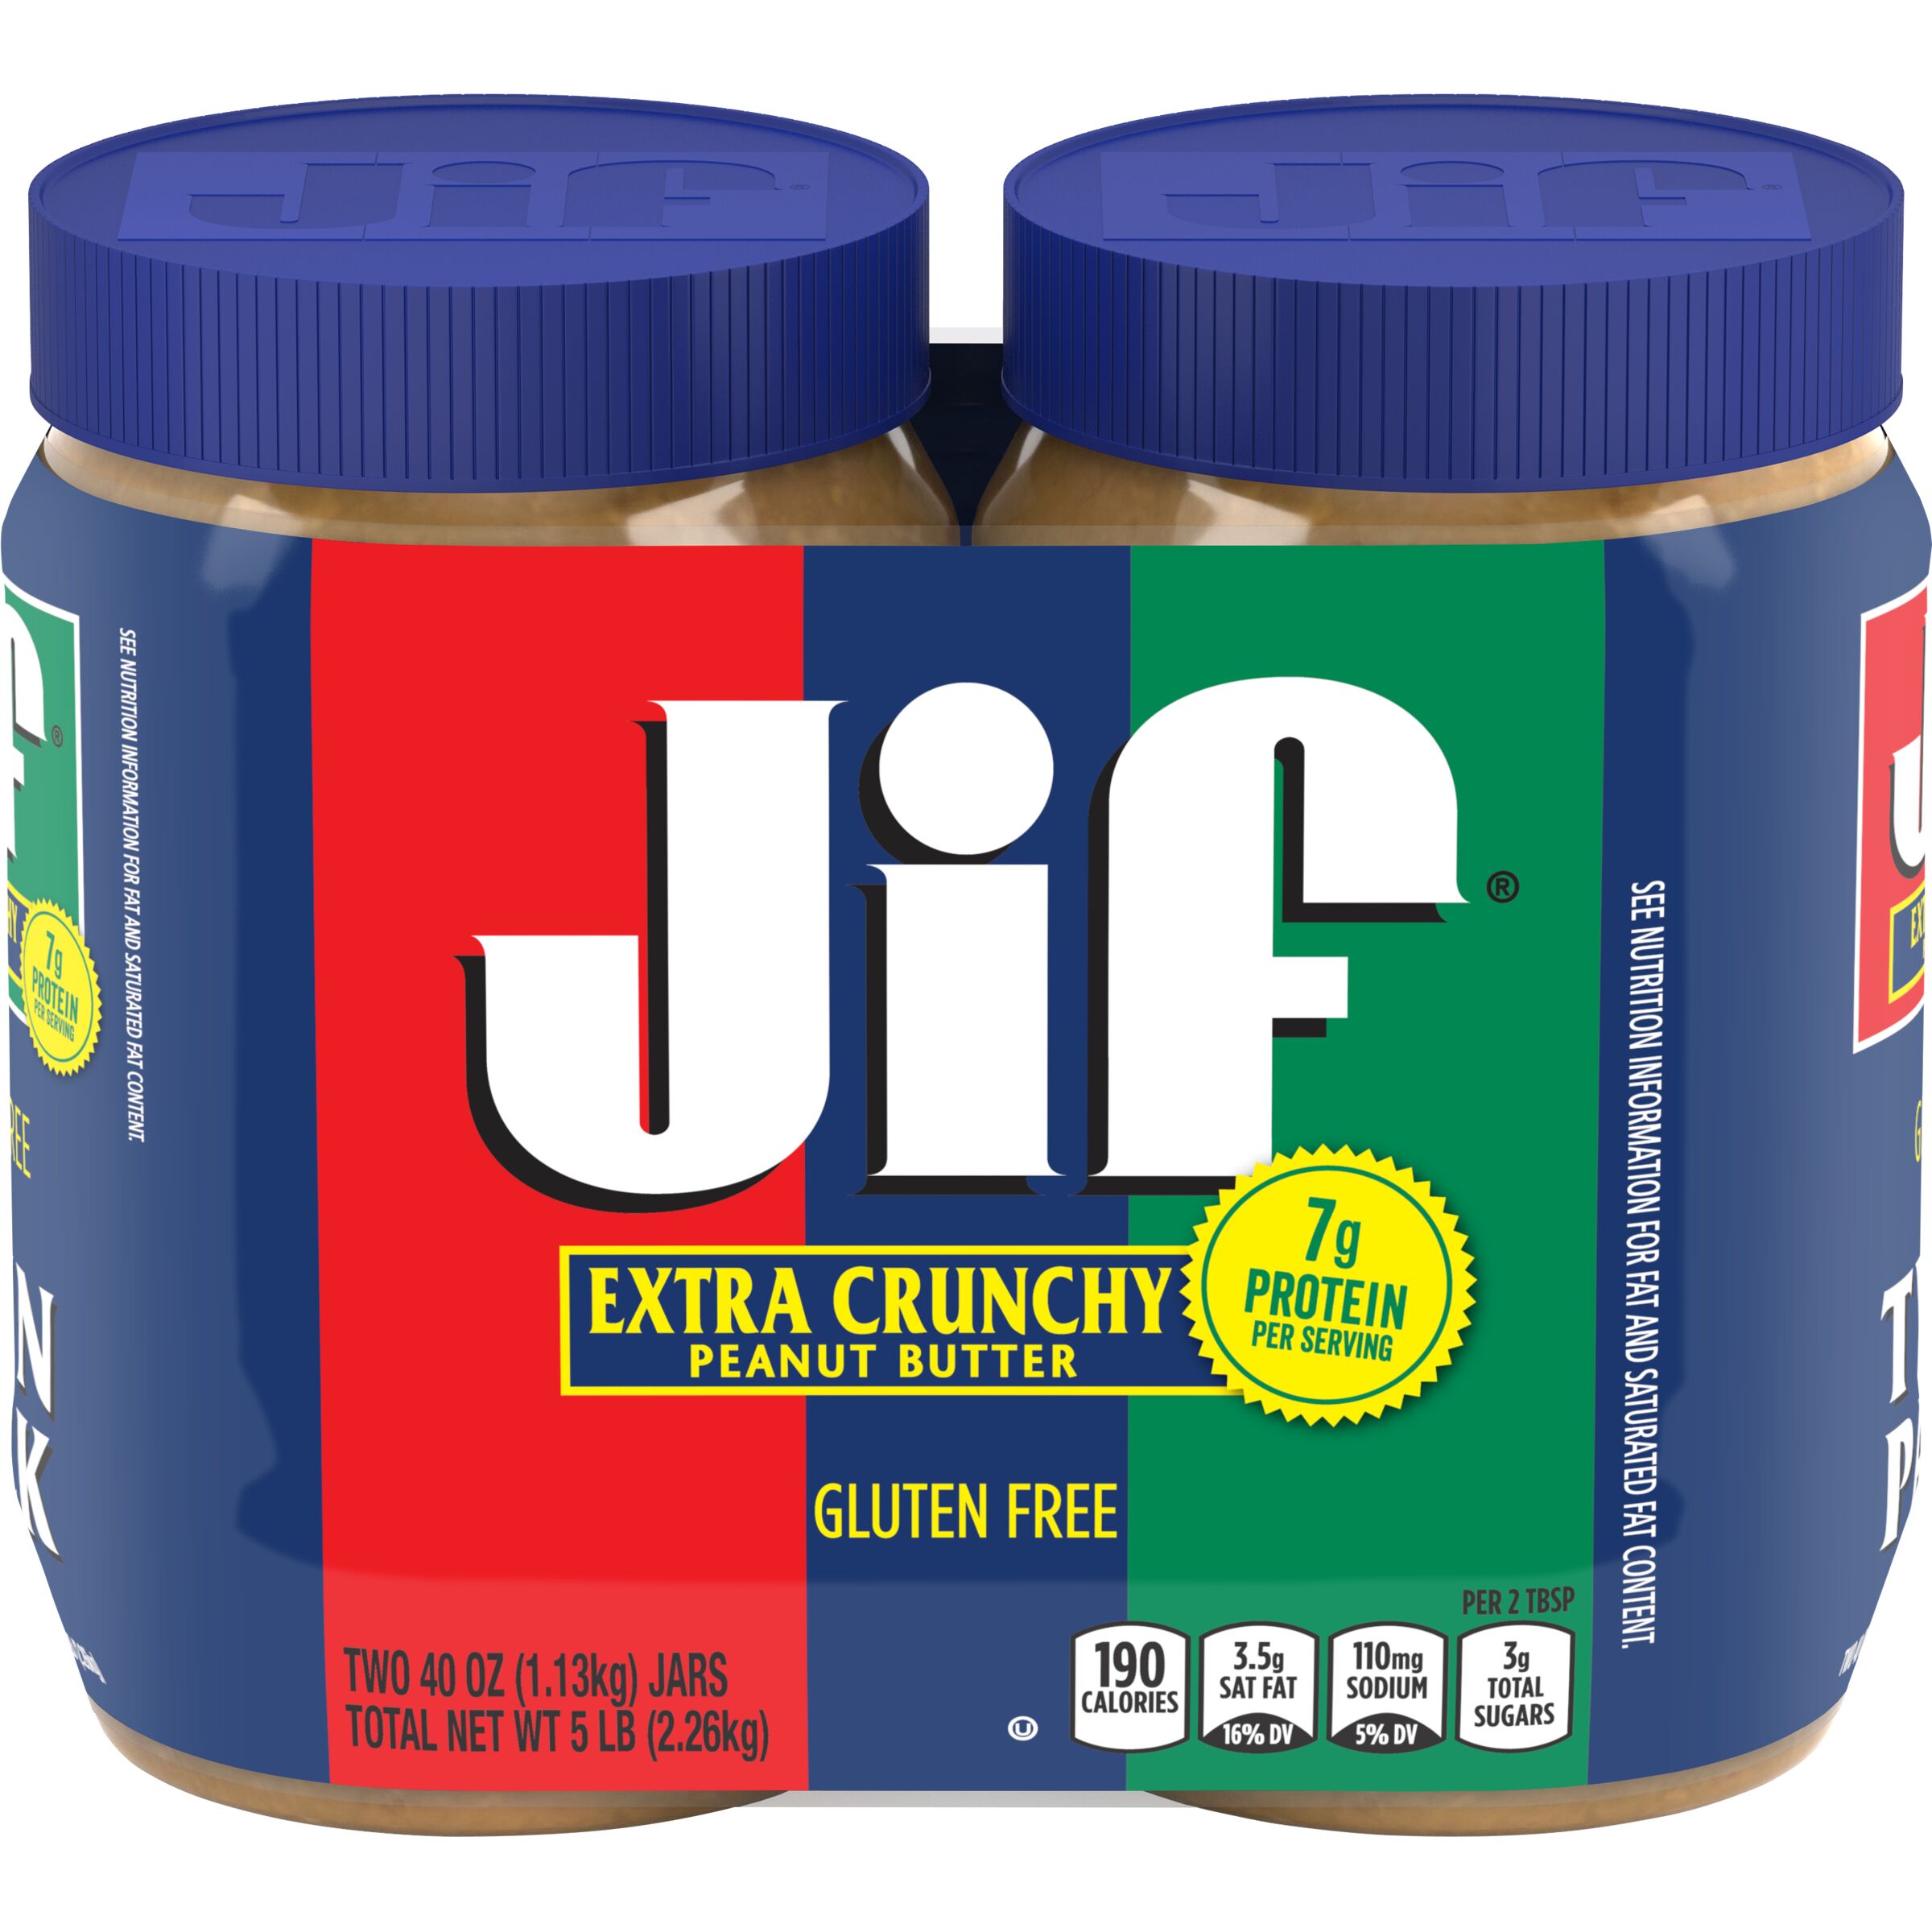 Jif Extra Crunchy Peanut Butter Twin Pack, 80-Ounce - image 1 of 8